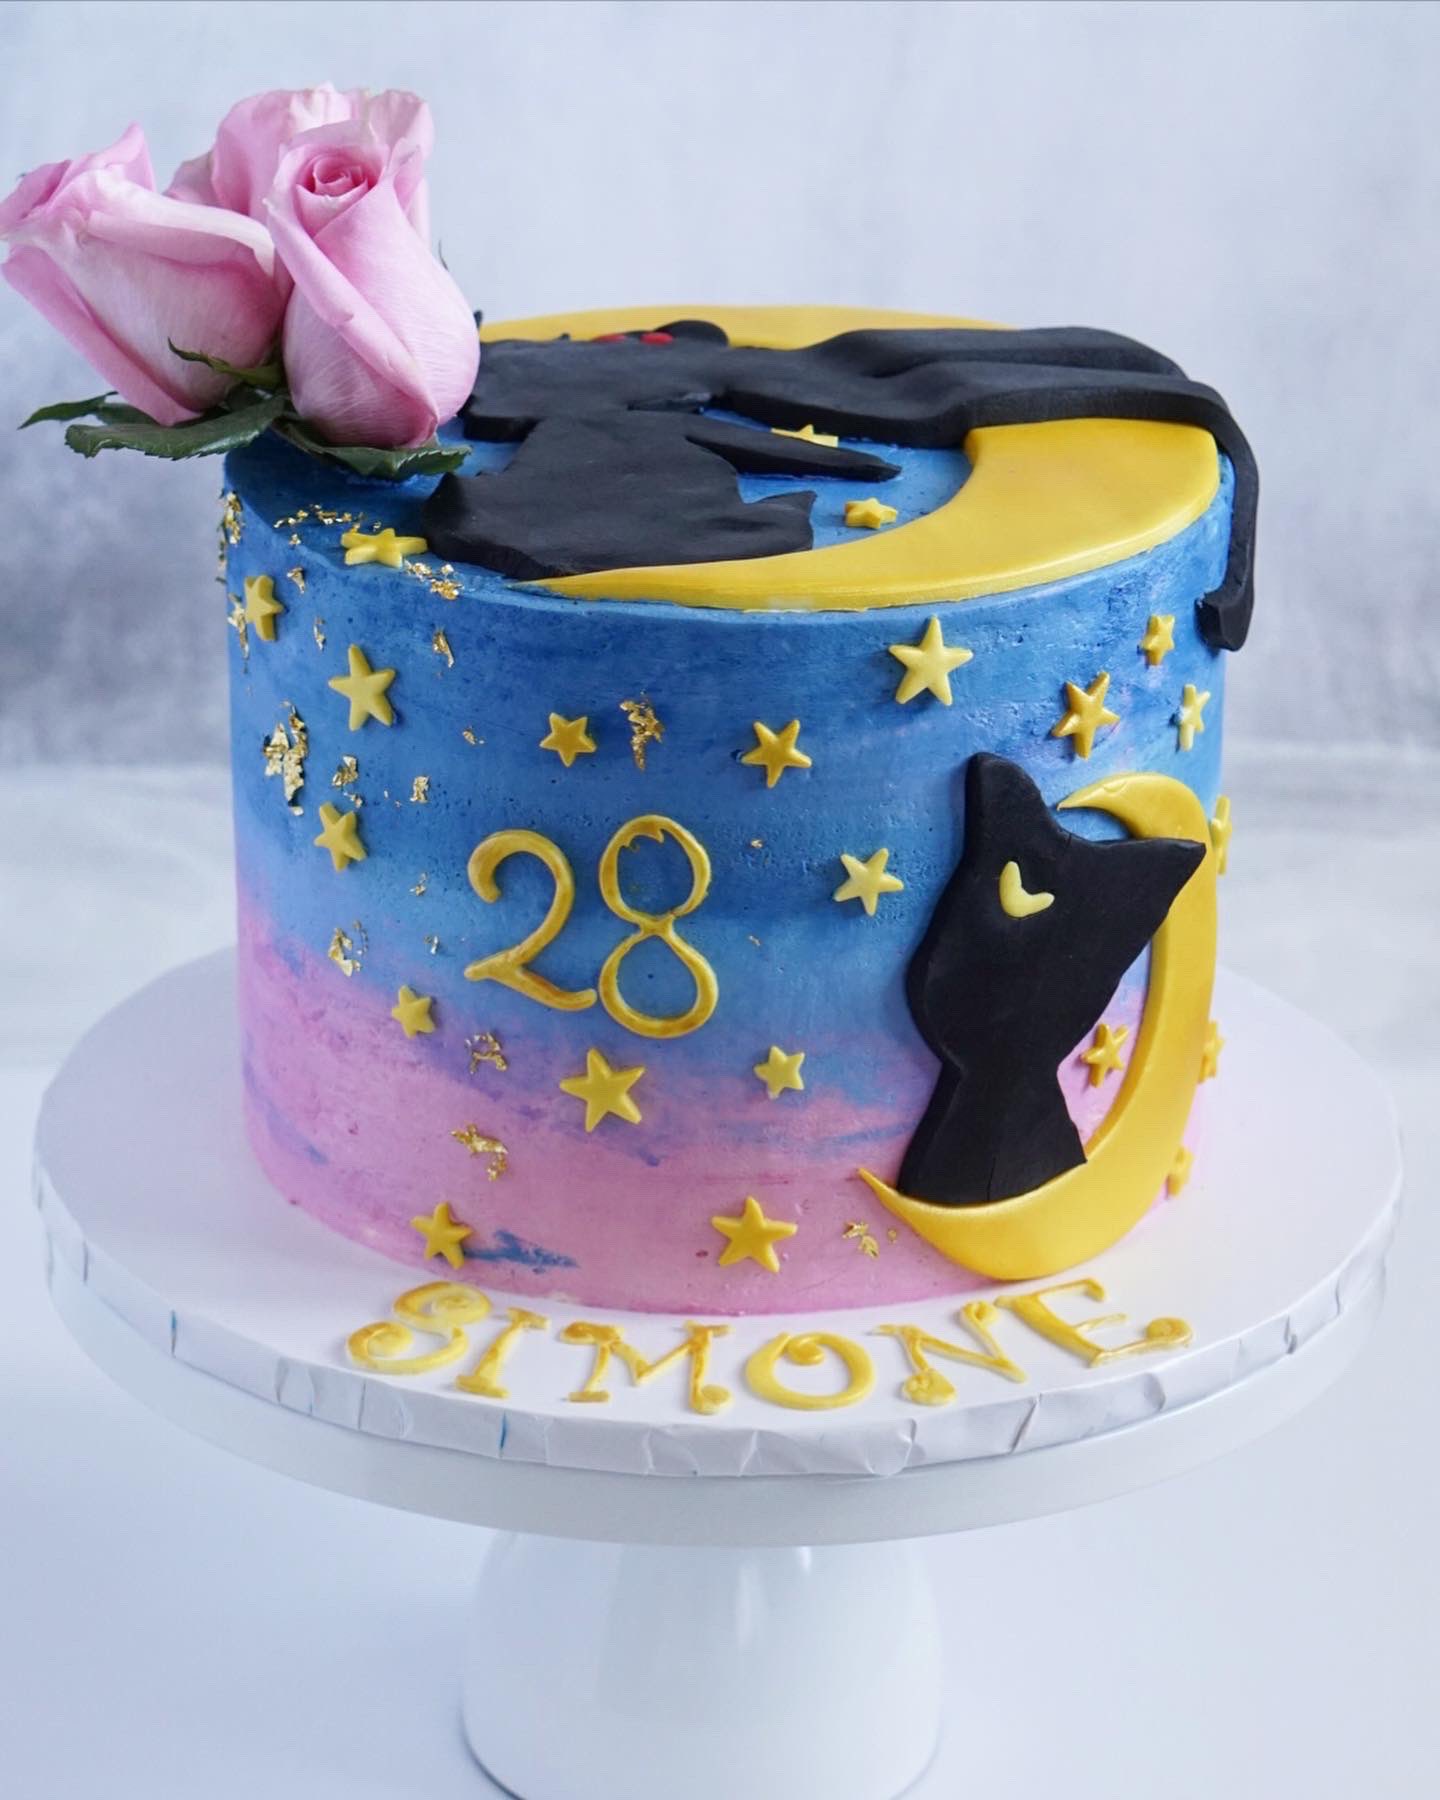 Lainey's on X: "Sailor Moon themed cake! Who didn't have a crush on Tuxedo Mask growing up?!? 😍😍😍 Of course Luna had to be a part of it. #sailormoon #tuxedomask #luna #sailormooncake #